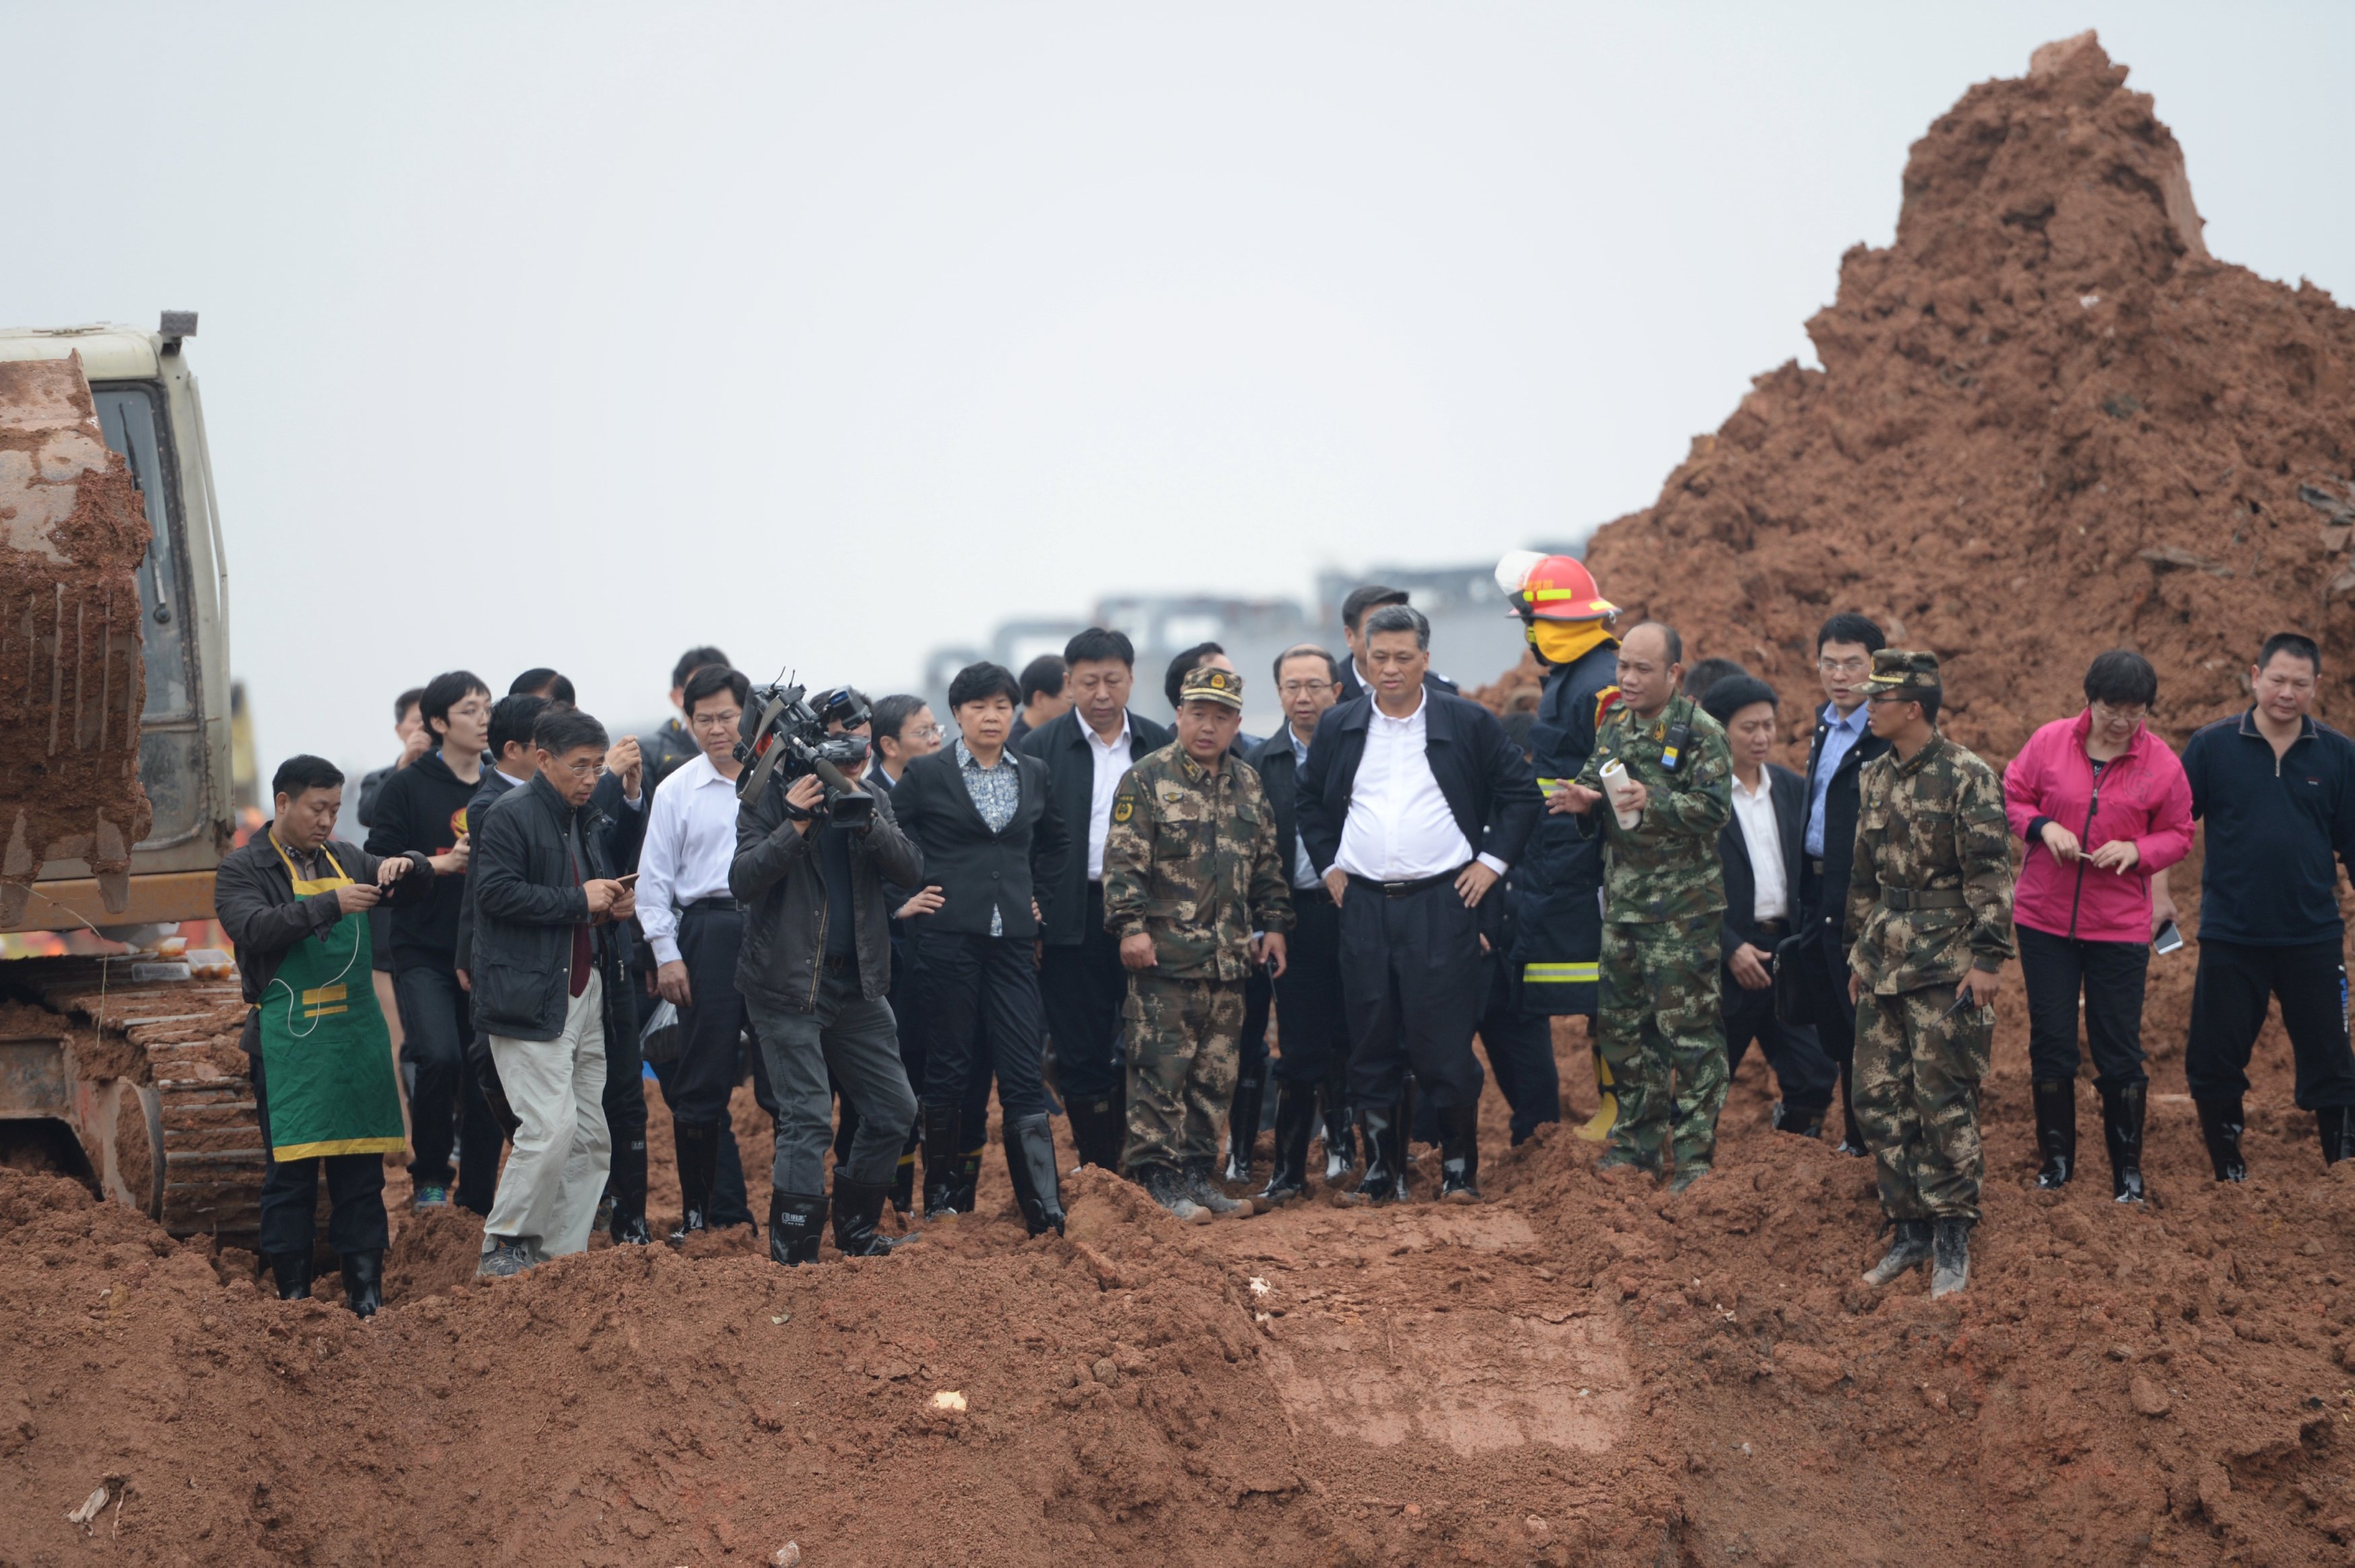 Ma Xingrui (front, 3rd R), municipal party secretary of Shenzhen, and other officials visit the site after a landslide hit an industrial park in Shenzhen, Guangdong province, December 21, 2015. REUTERS/Stringer ATTENTION EDITORS - THIS PICTURE WAS PROVIDED BY A THIRD PARTY. THIS PICTURE IS DISTRIBUTED EXACTLY AS RECEIVED BY REUTERS, AS A SERVICE TO CLIENTS. CHINA OUT. NO COMMERCIAL OR EDITORIAL SALES IN CHINA.